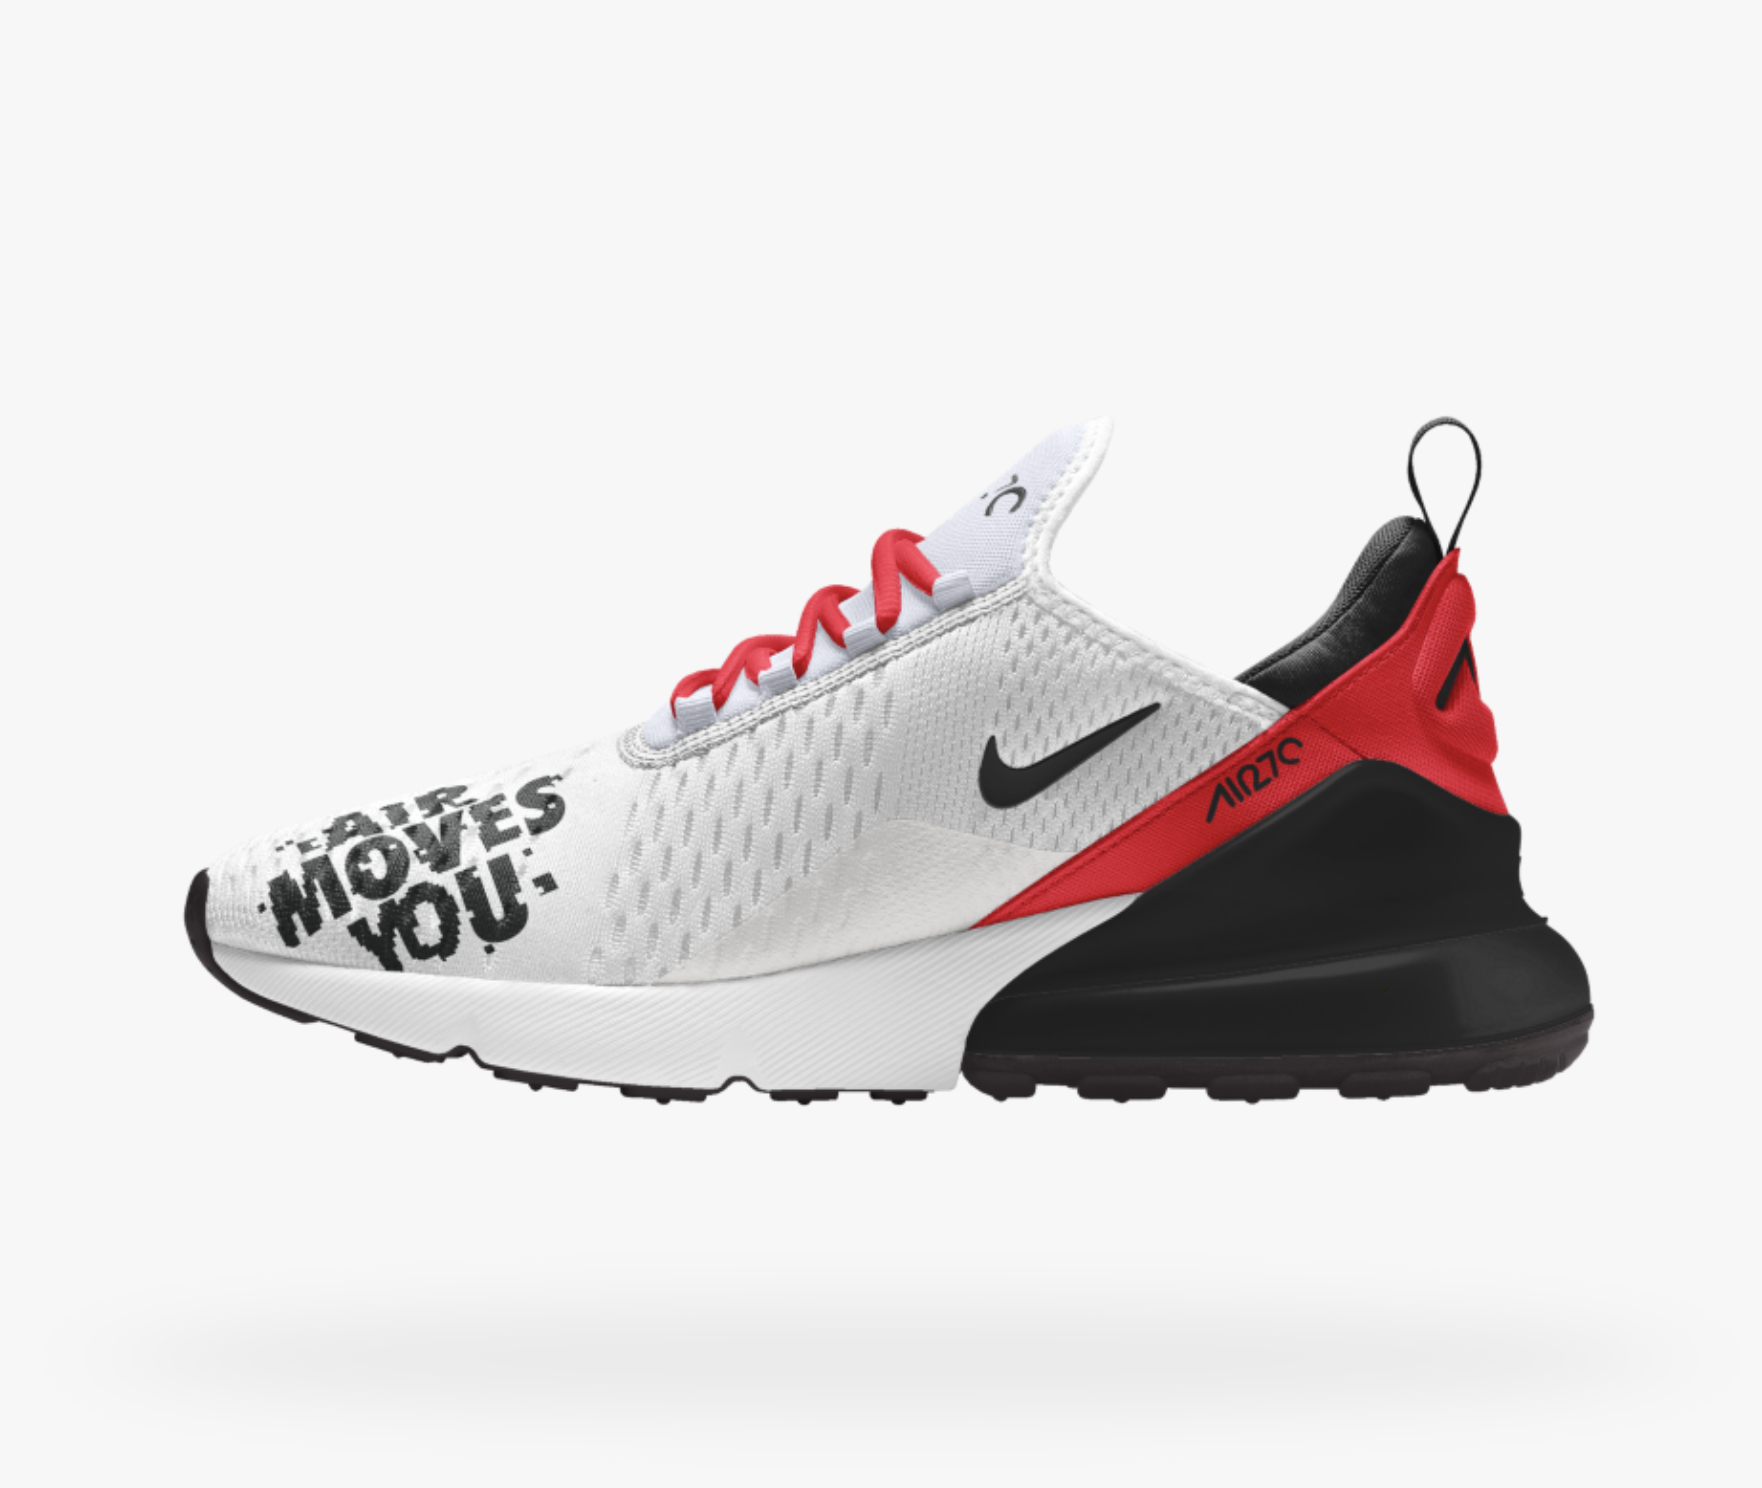 Now Available: Nike Air Max 270 ID — Sneaker Shouts